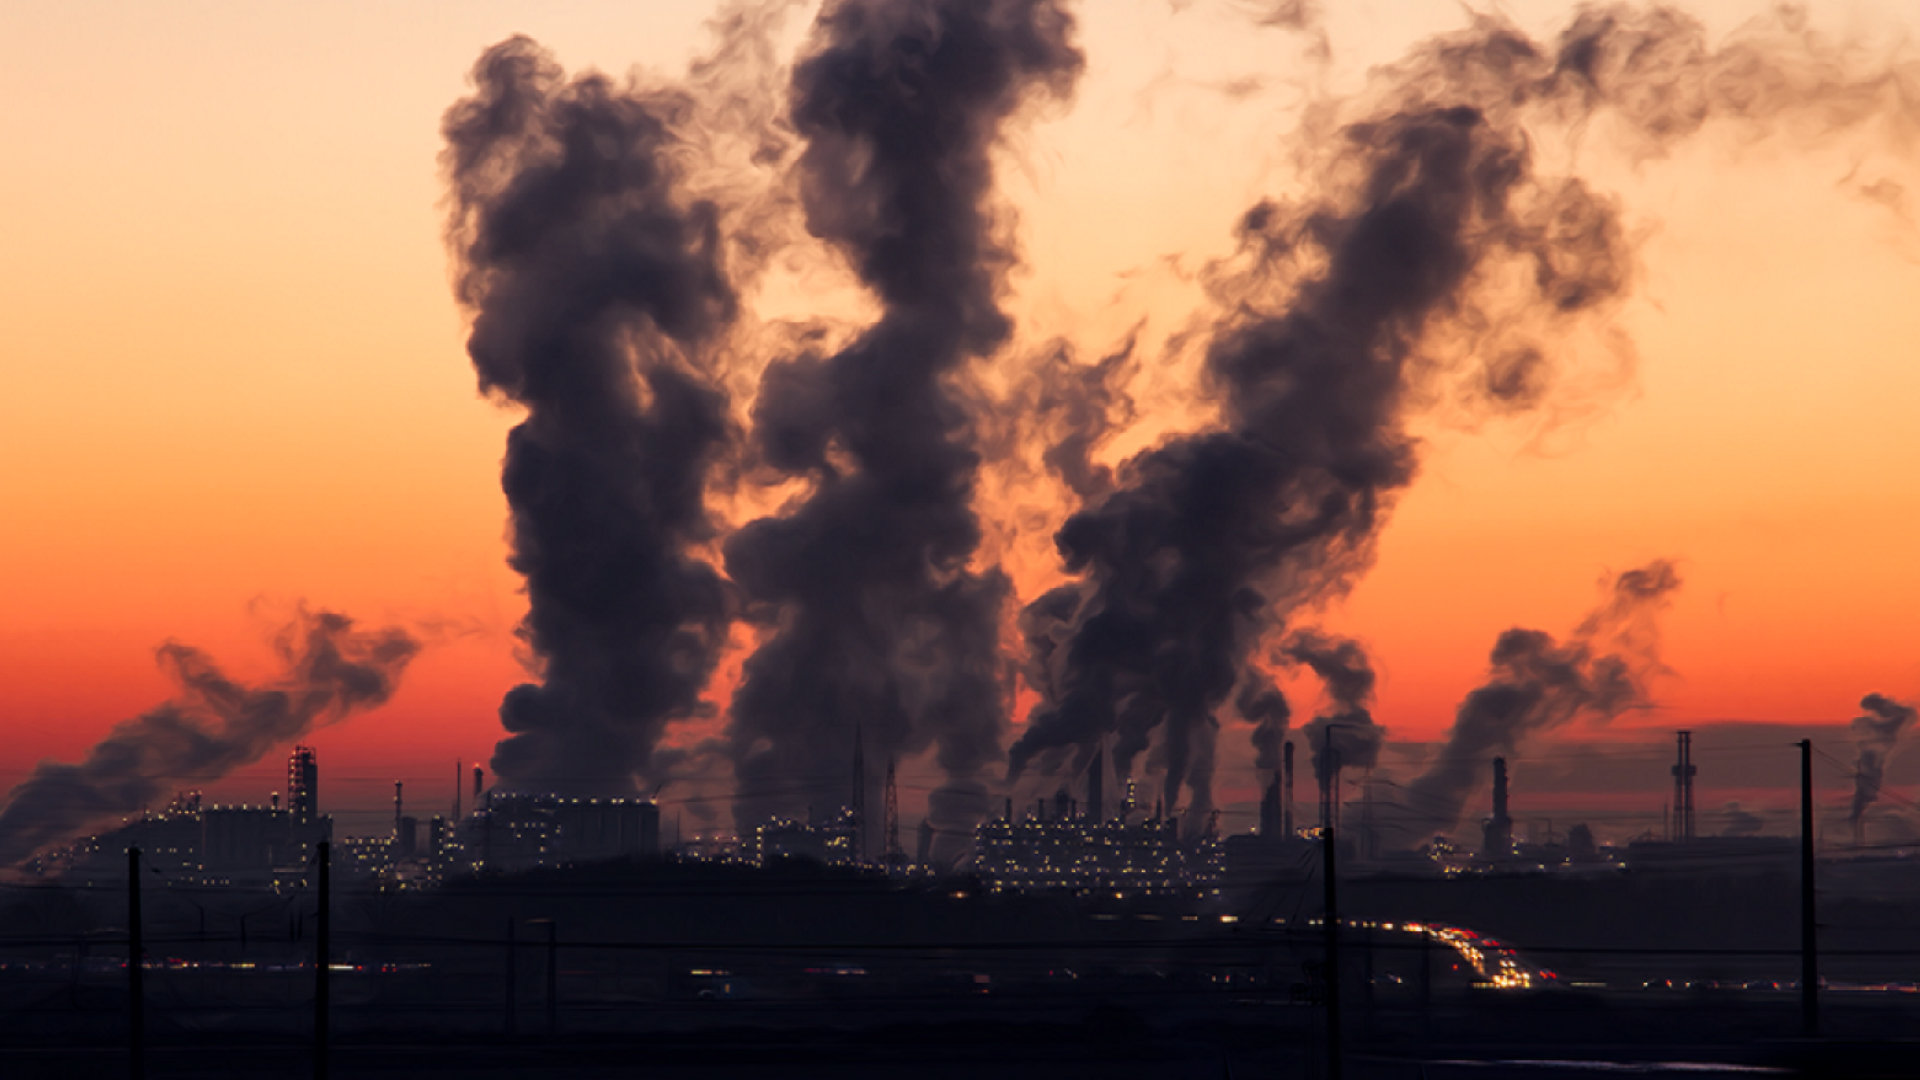 air-pollution-homepage-210218-mb.png